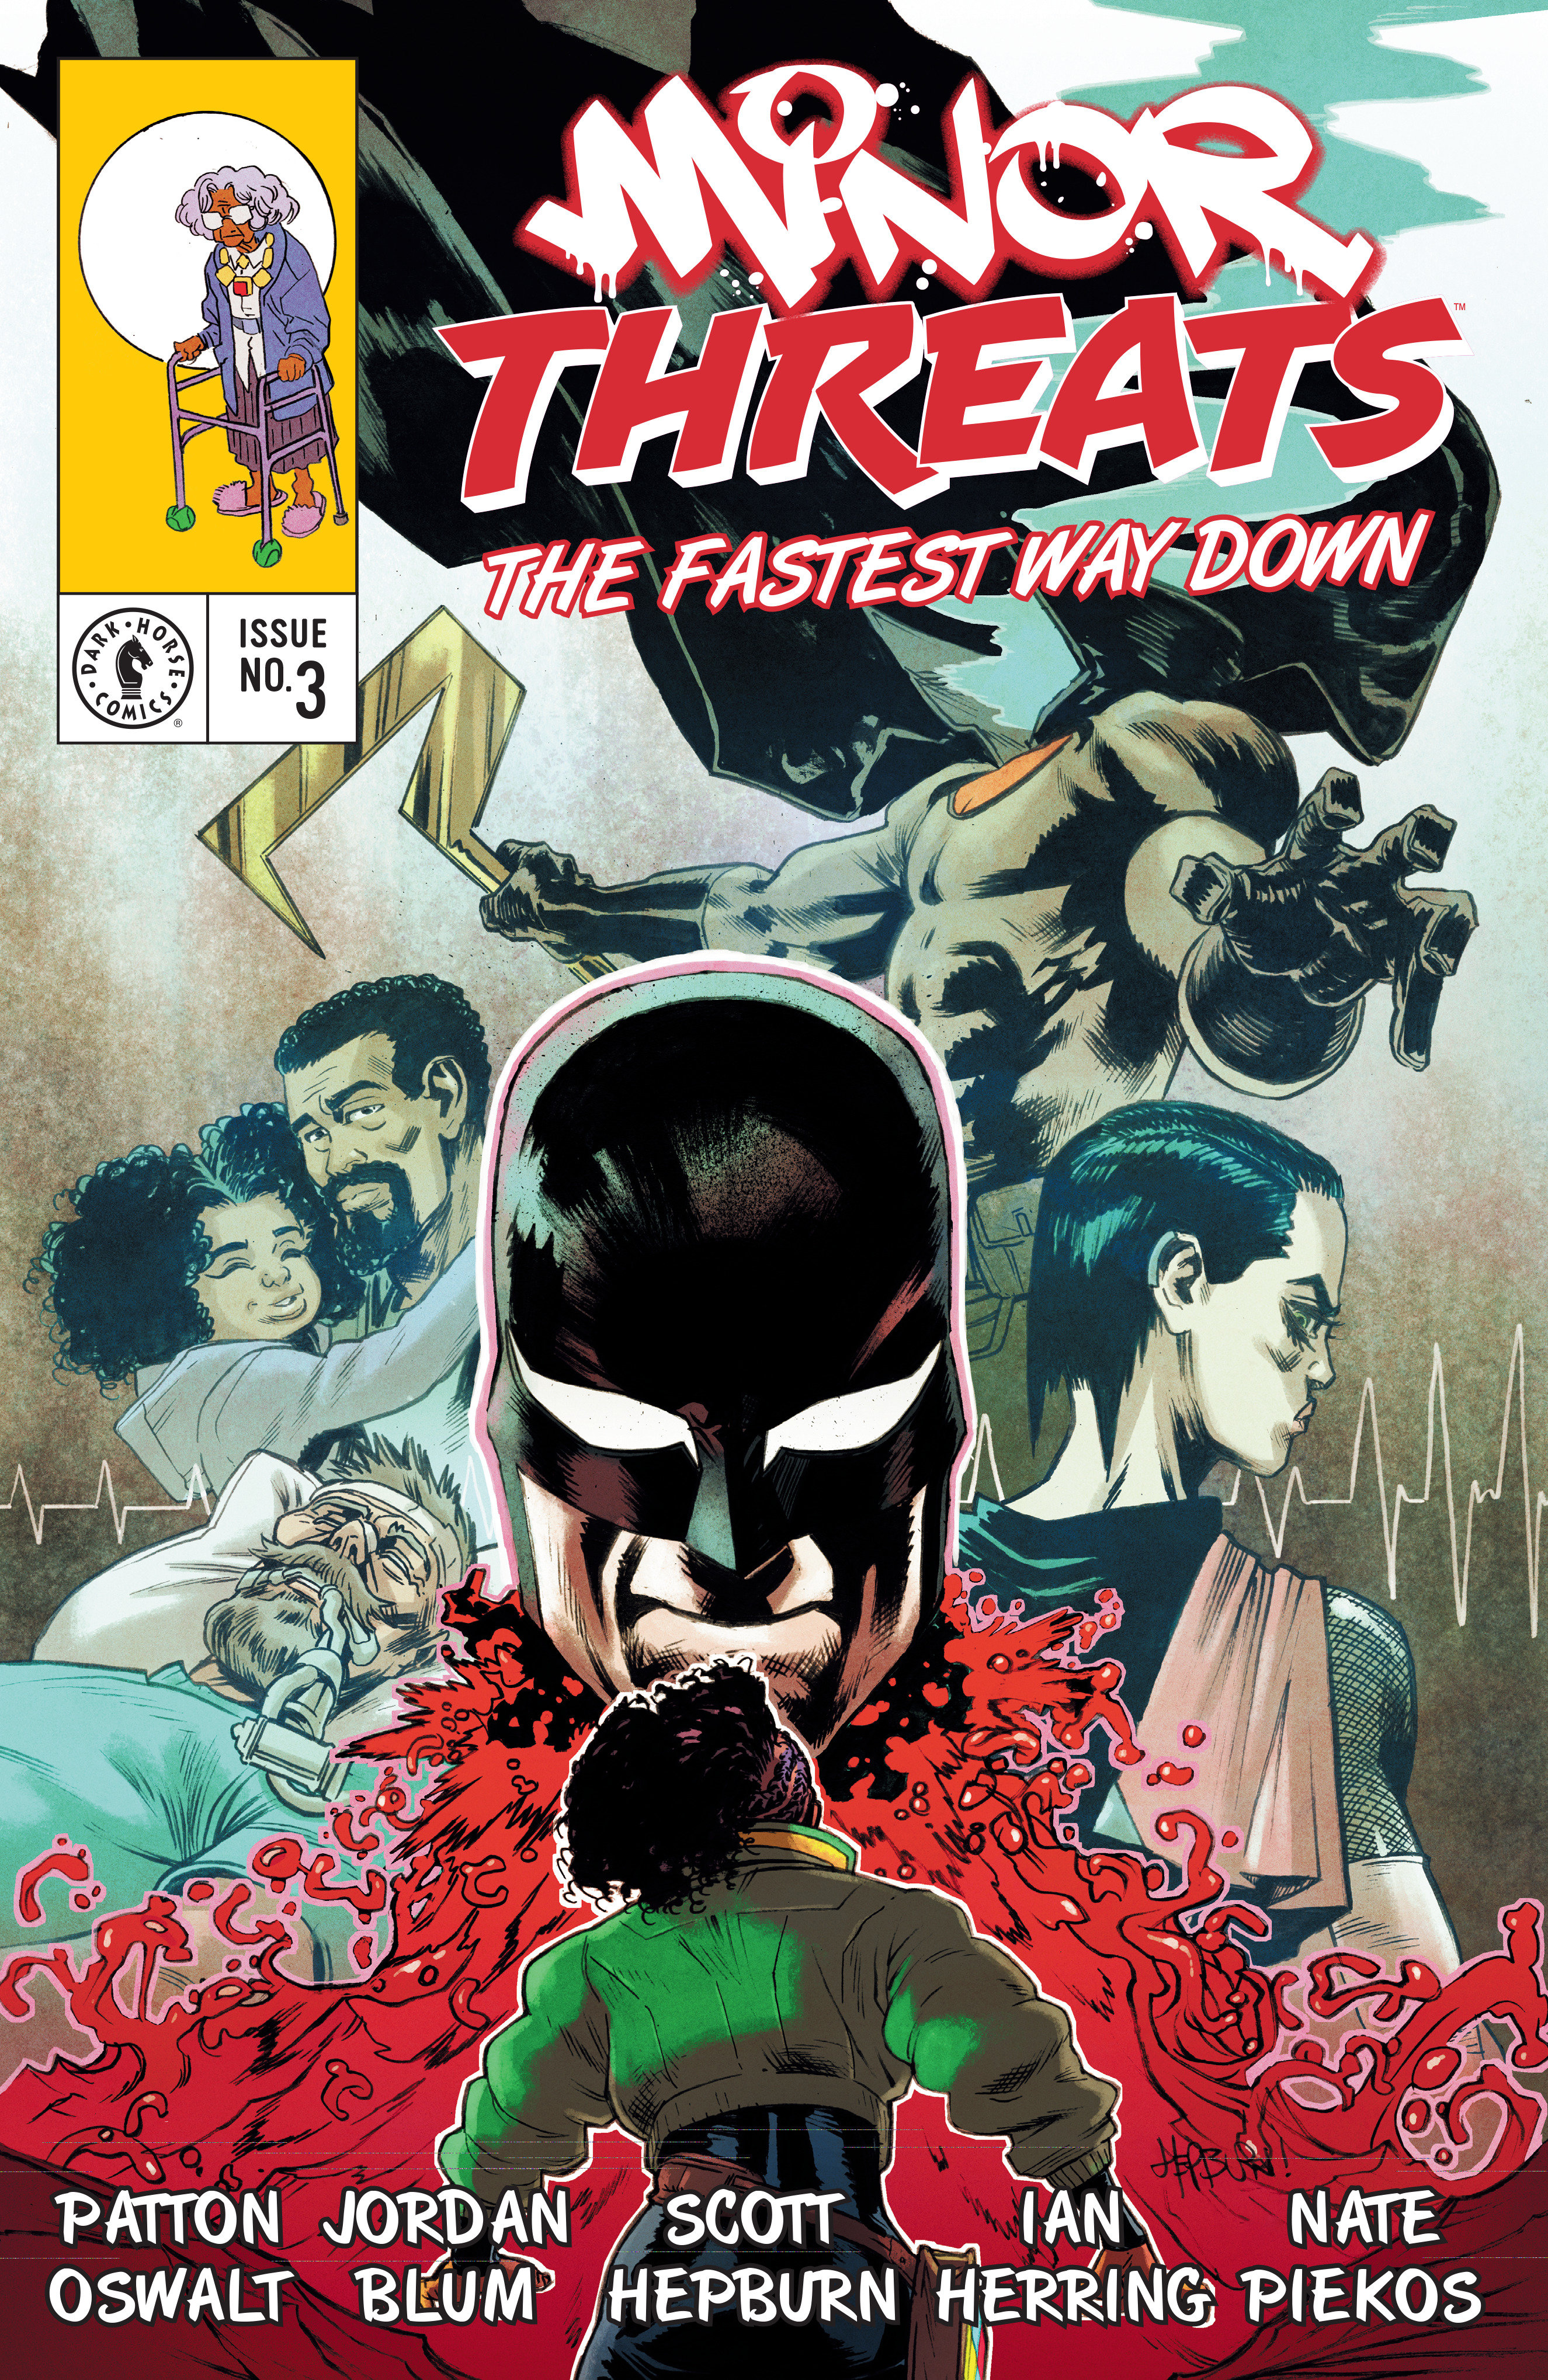 Minor Threats: The Fastest Way Down #3 Cover A Hepburn